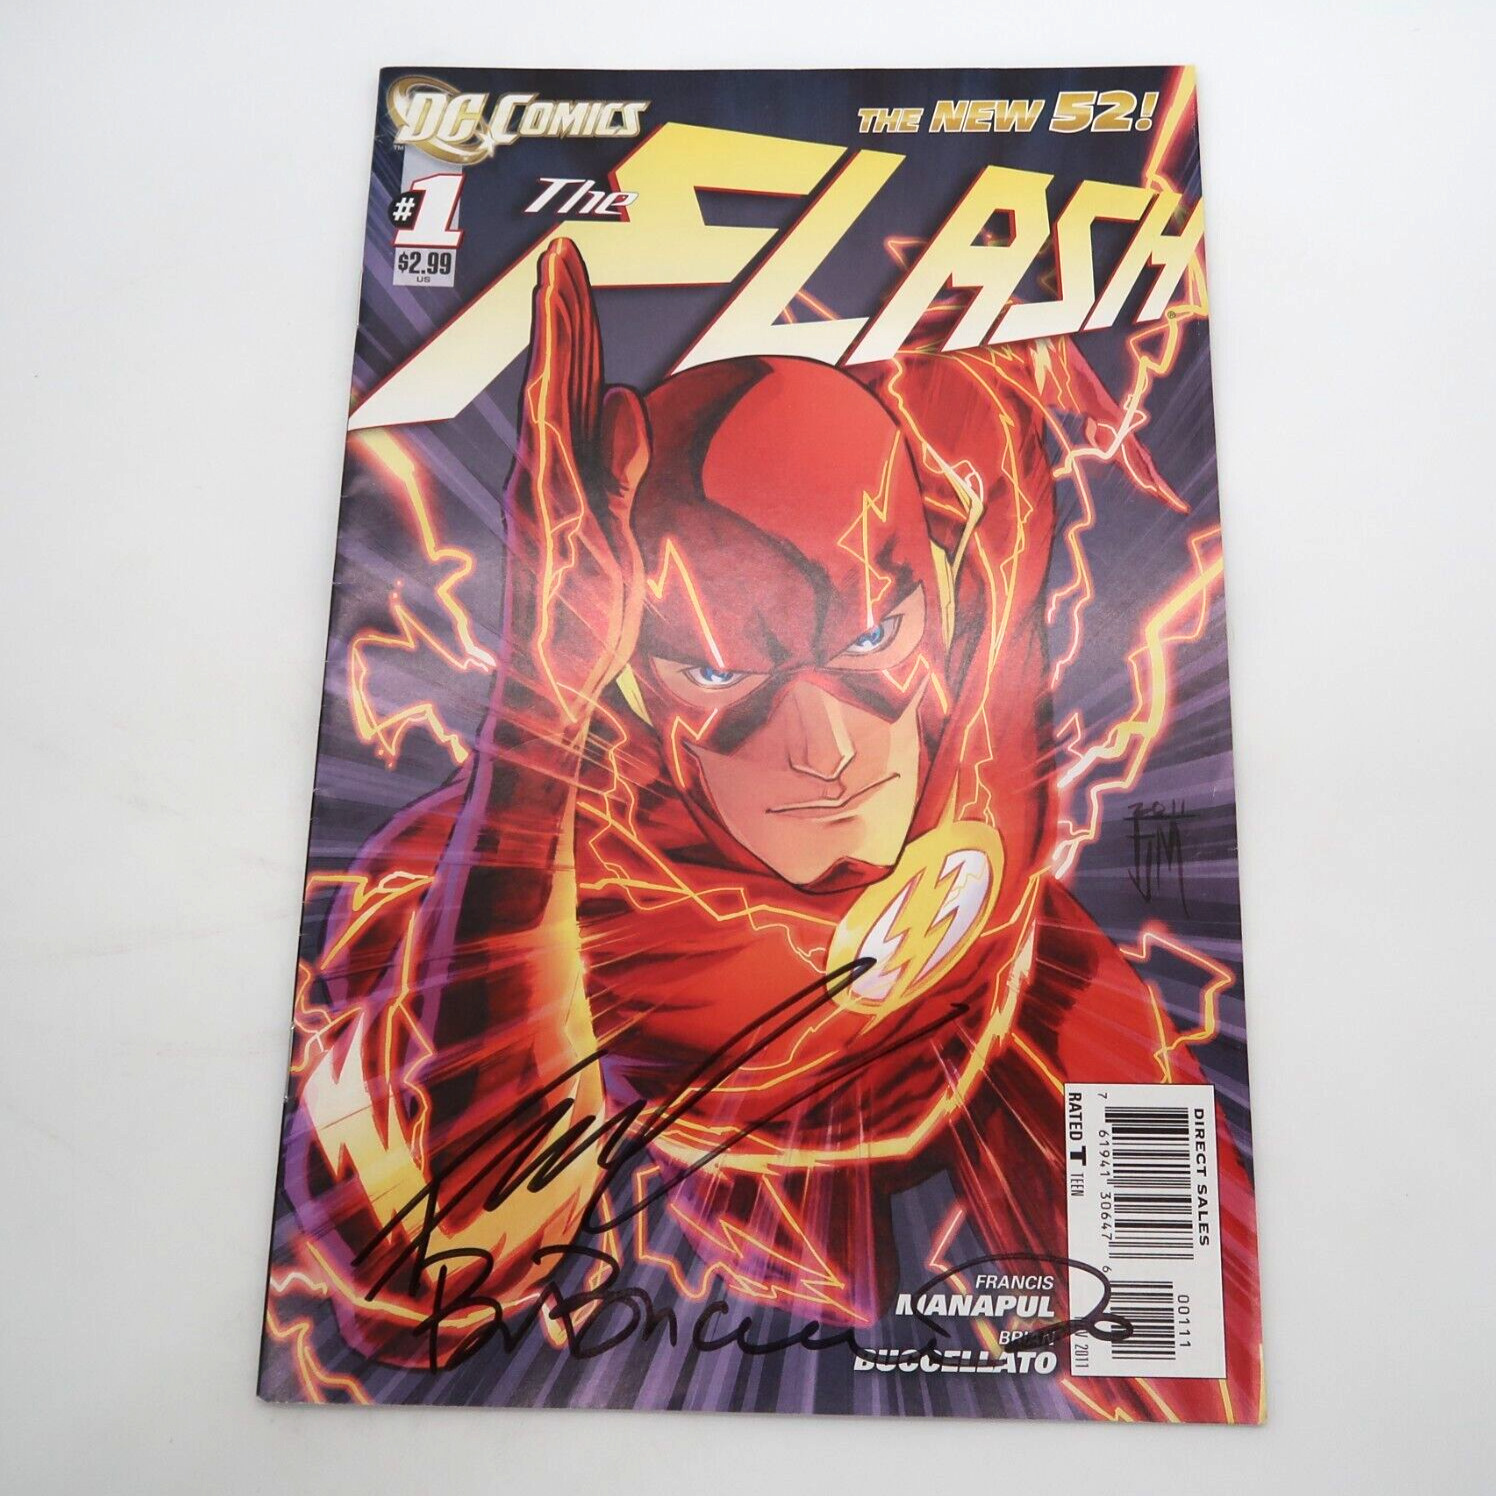 DC Comics The Flash #1 2011 Signed by Brian Buccellato Key Issue